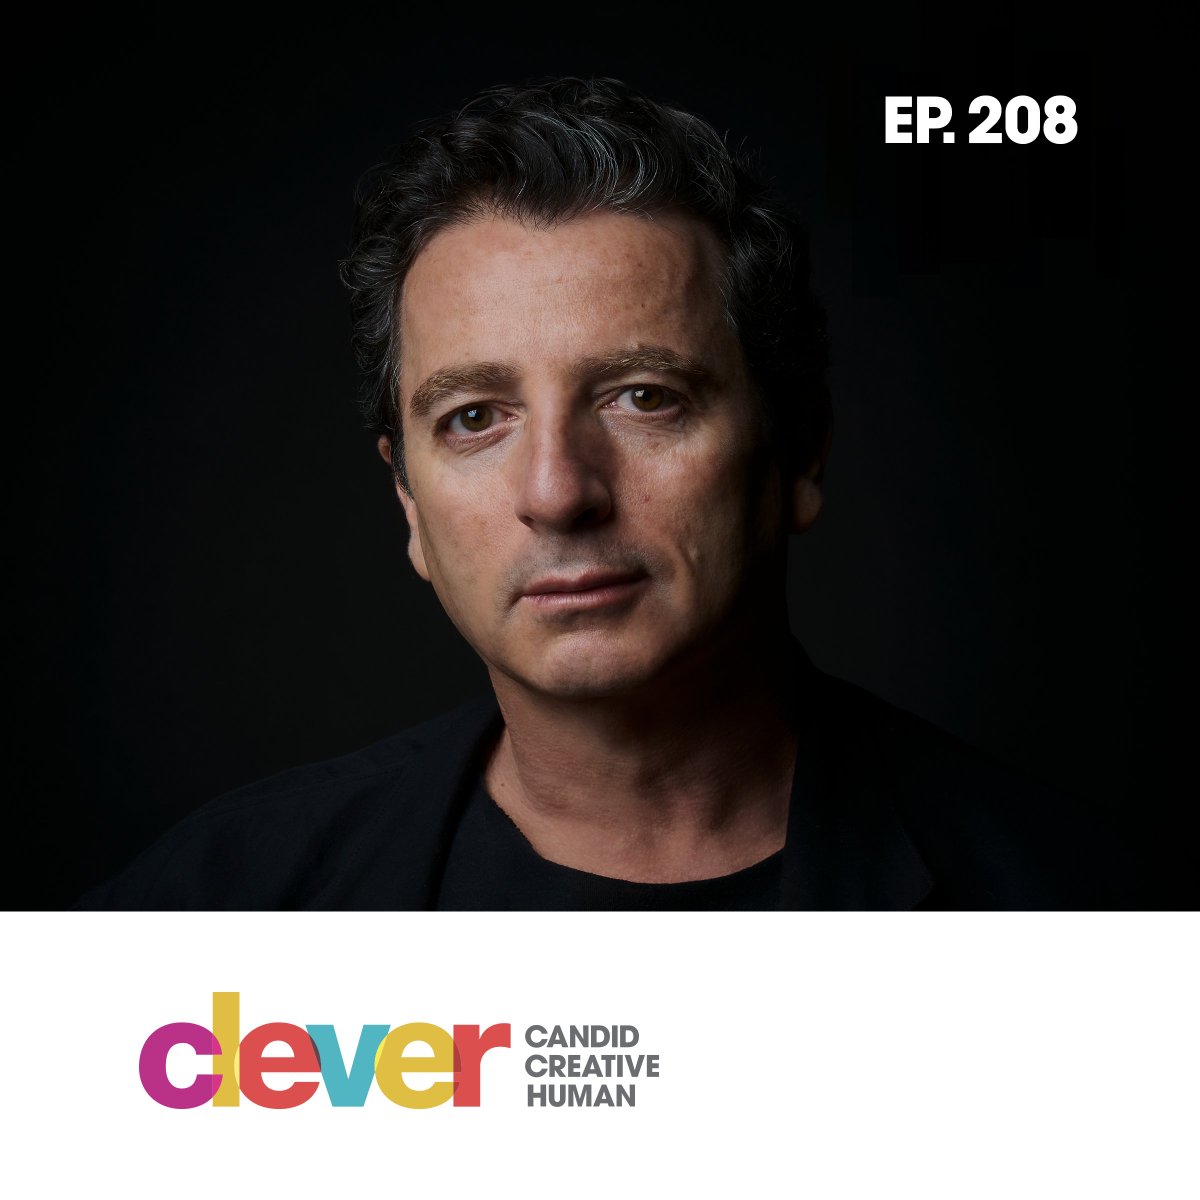 NEW EP! @ICRAVE's @lionelohayon on Designing the Las Vegas Sphere and Other Brave Ideas ✨ He's now leading the charge in reinventing hospitality experiences like the immersive + otherworldly @SphereVegas 🤯 Listen now w/ @amydevers! pod.link/clever